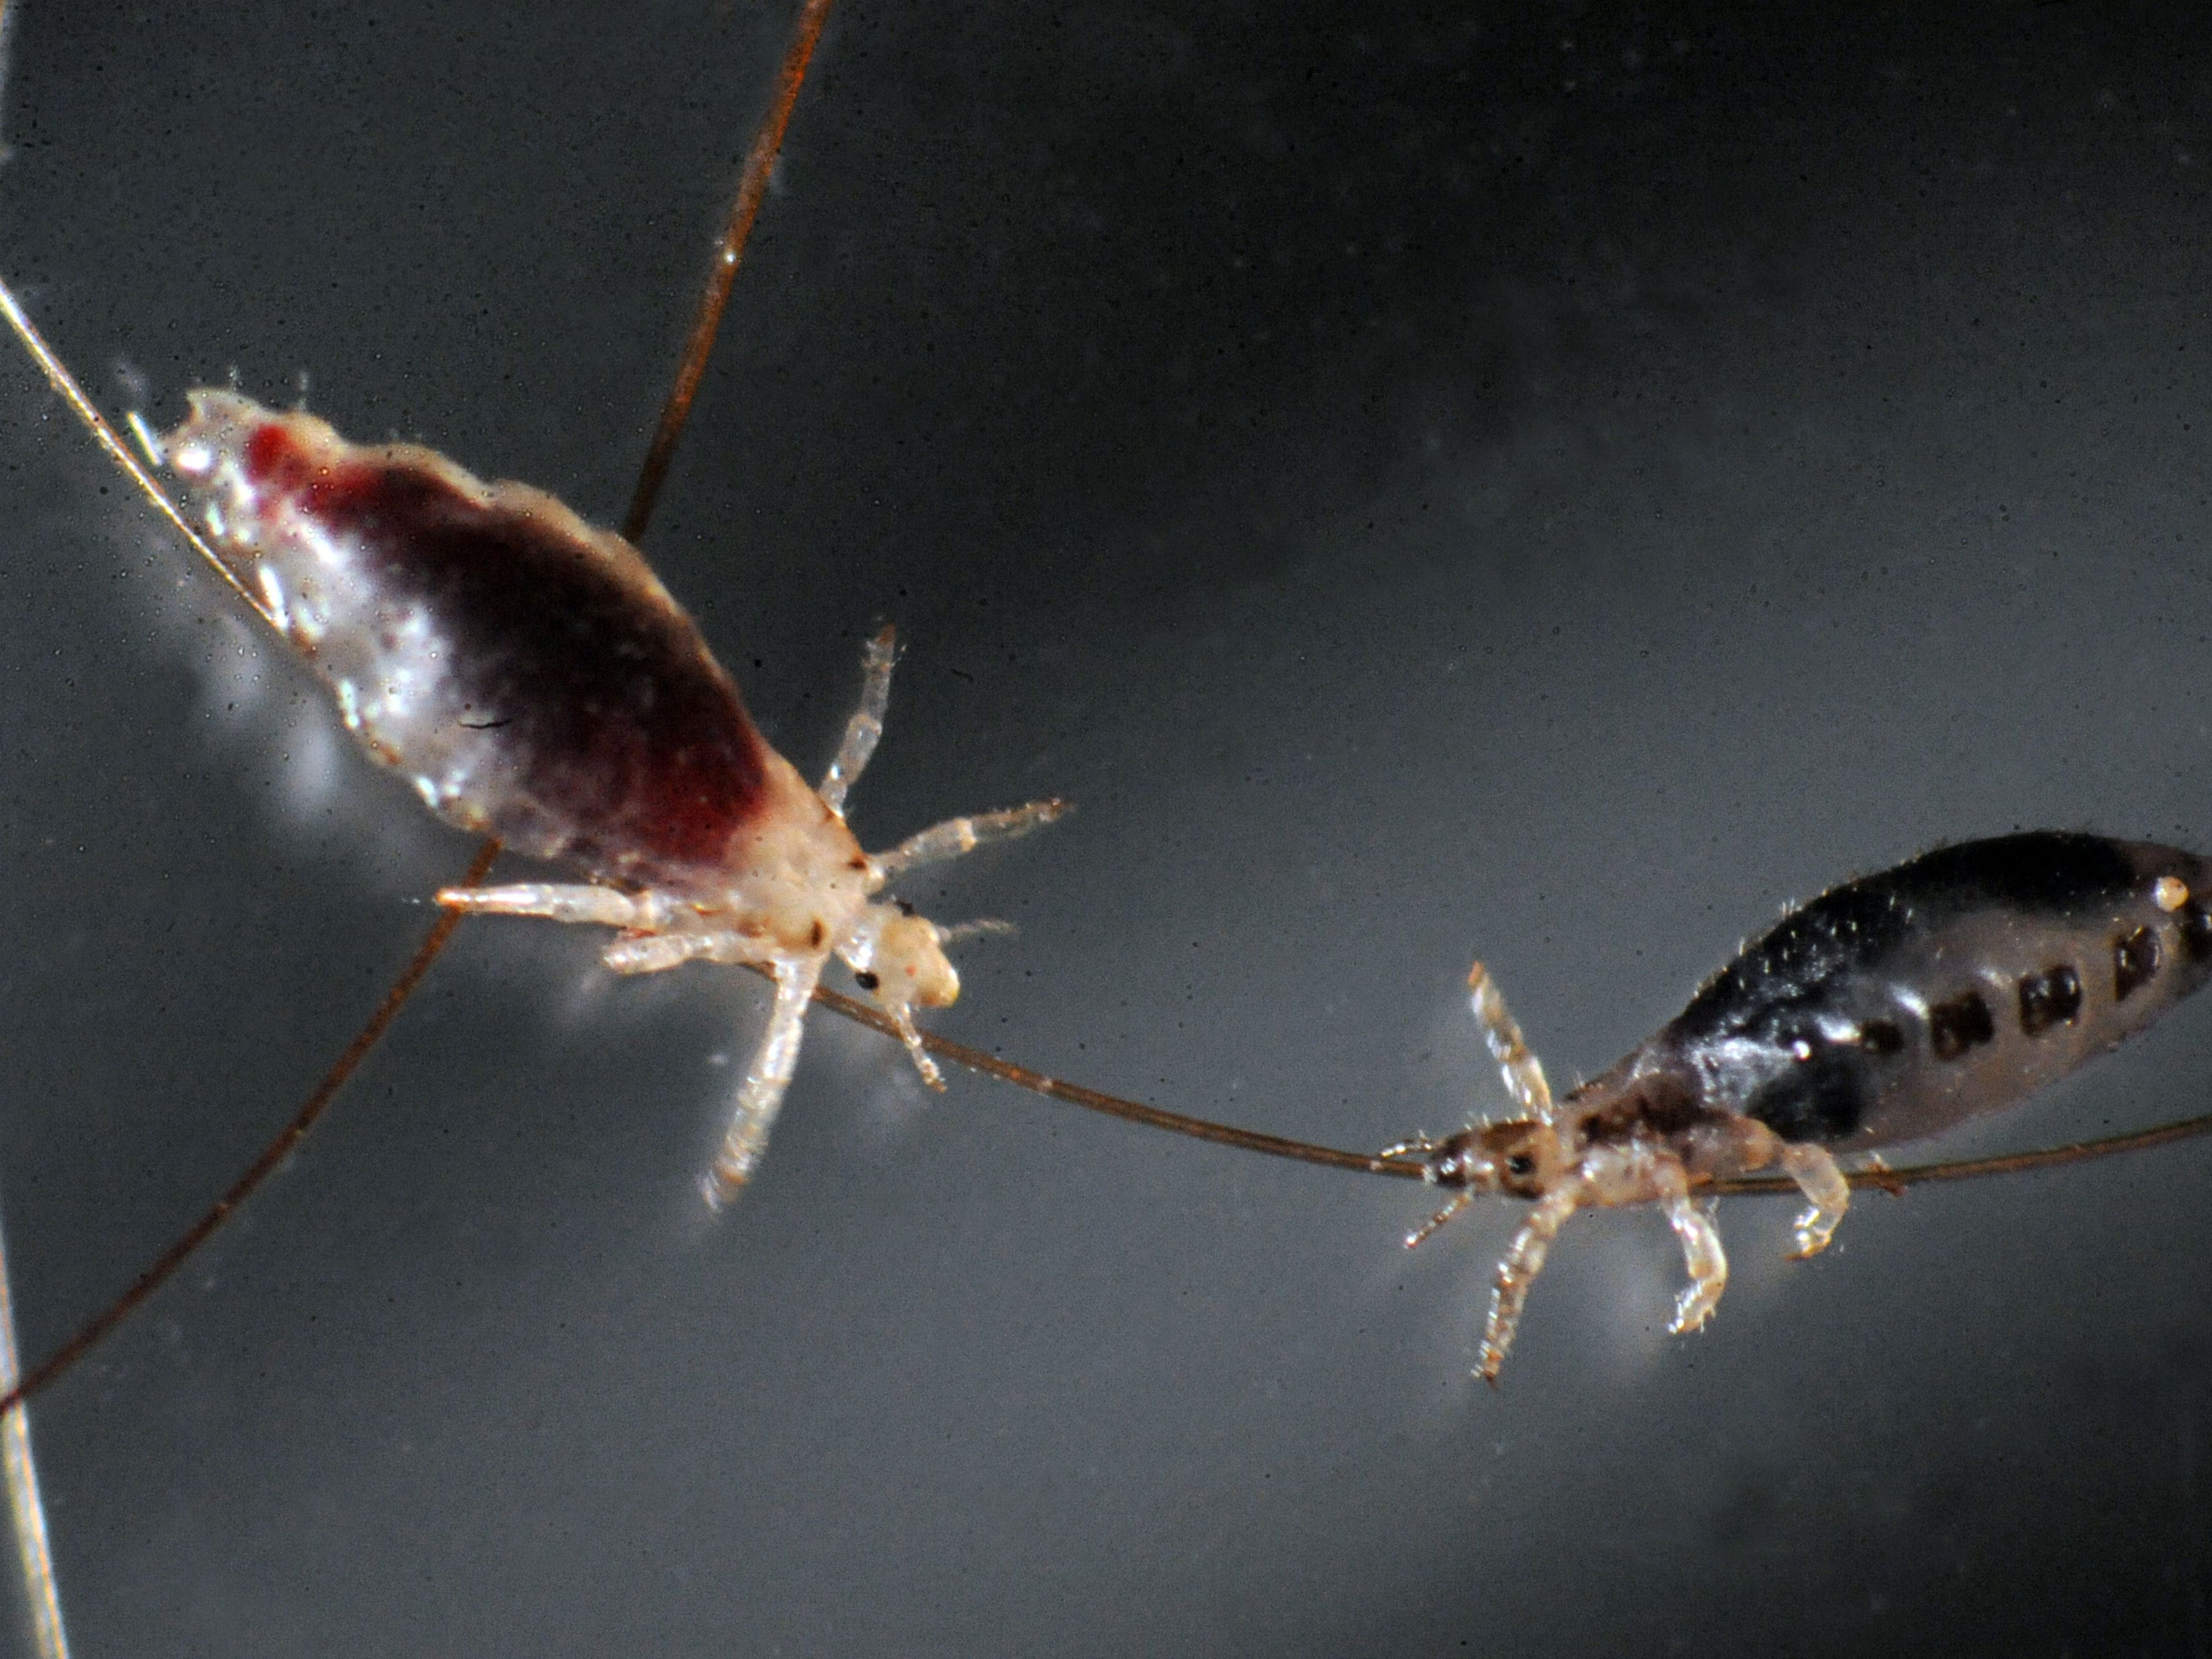 Hair lice may shed light on South America’s ancient populations